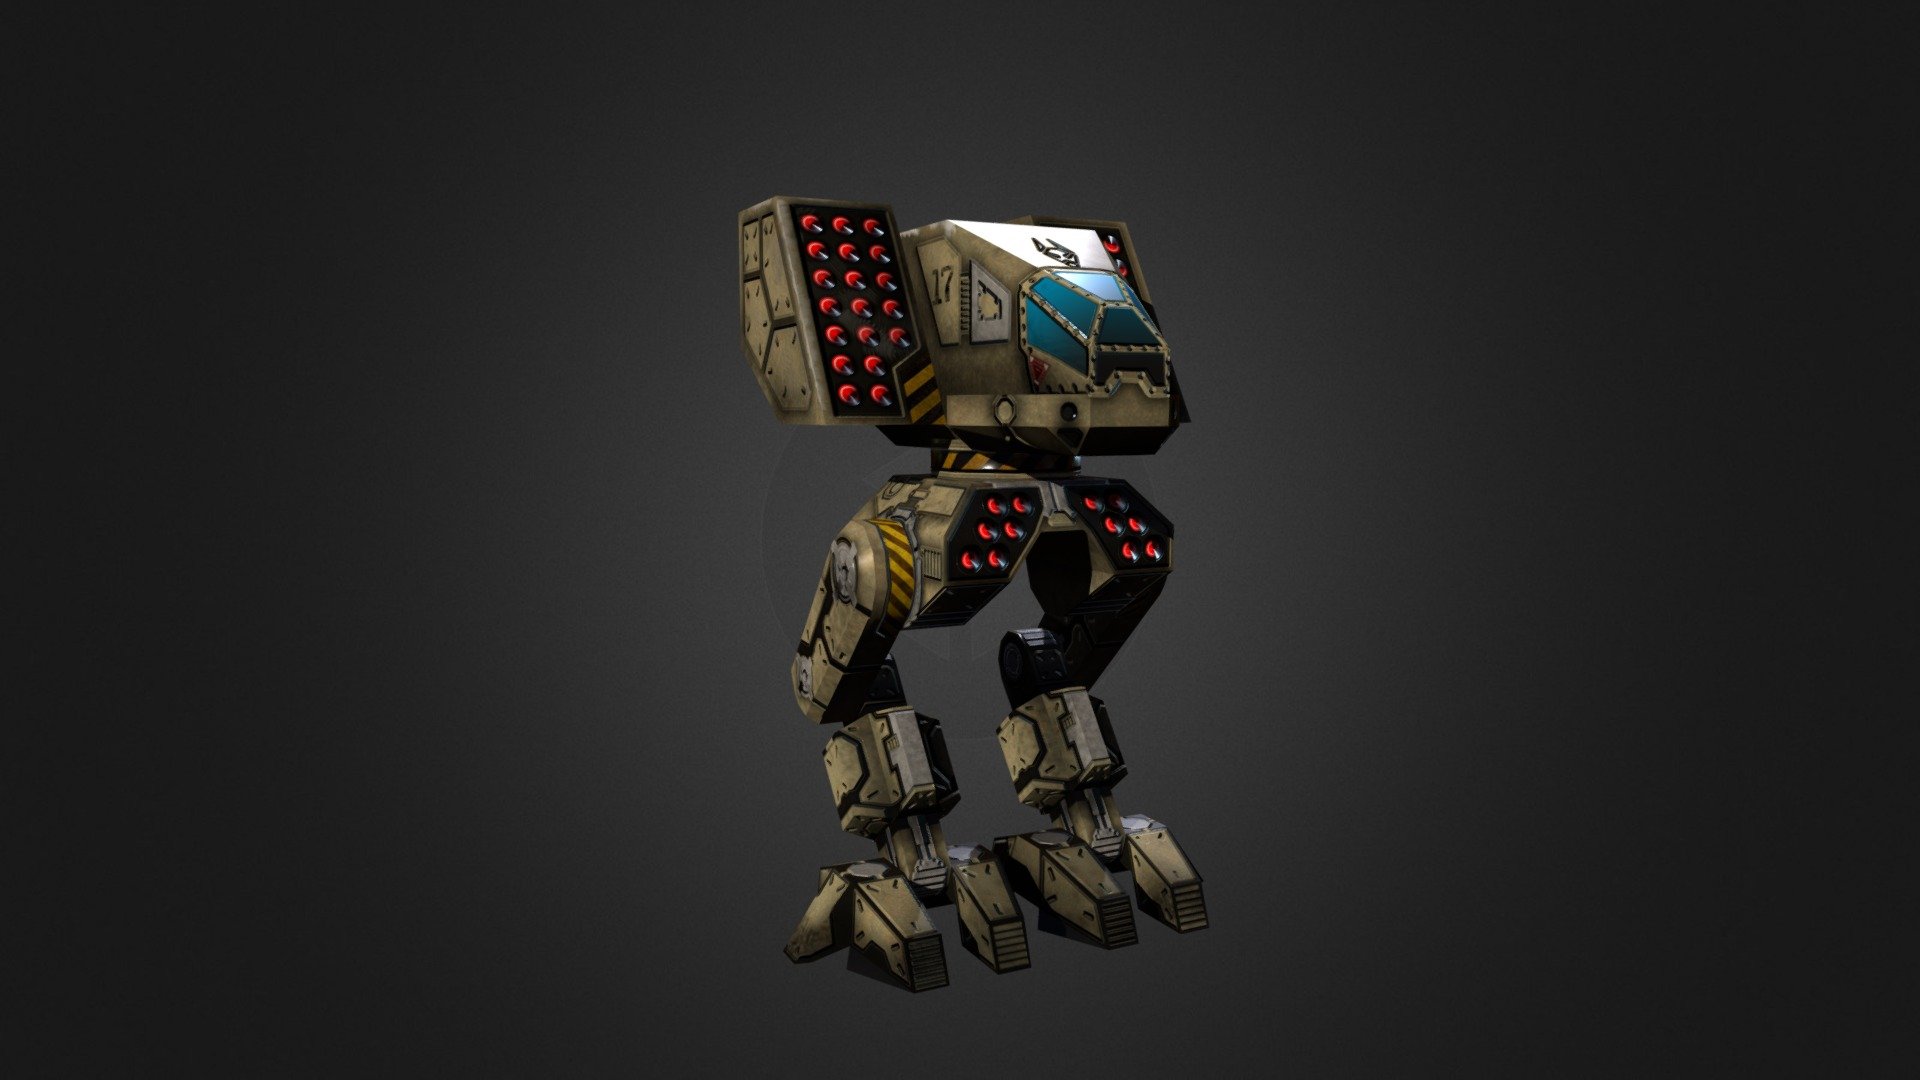 Bigfoot is one of my low-poly mech models designed for mobile game. It contains high resolution diffusemap, normalmap and specularmaps. Upon the request, model can be rigged and animated 3d model